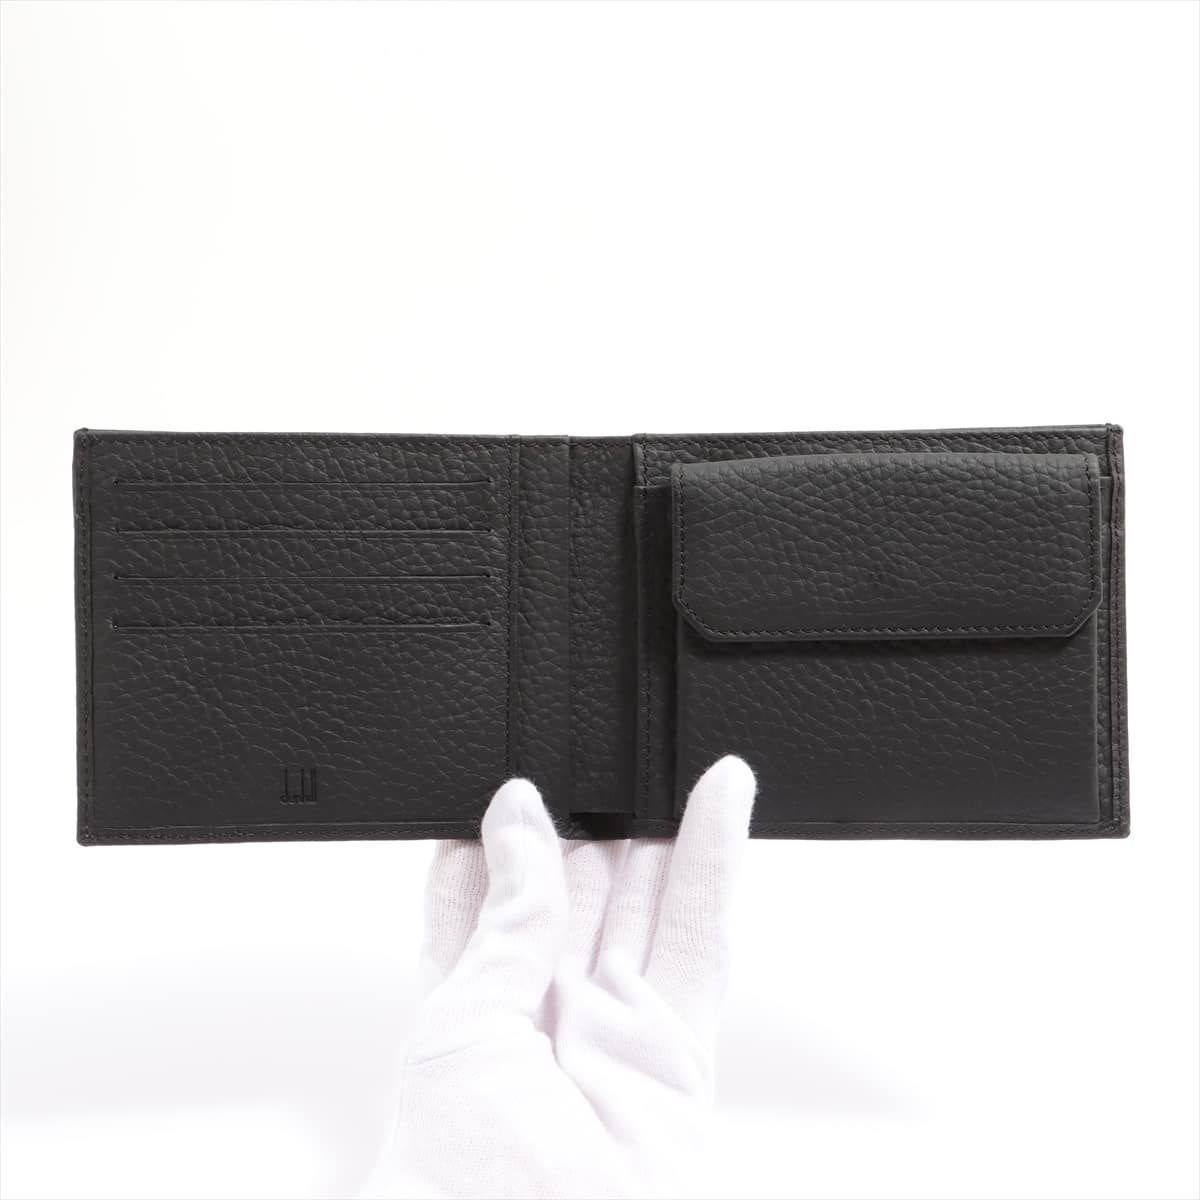 Dunhill Leather Wallet Black